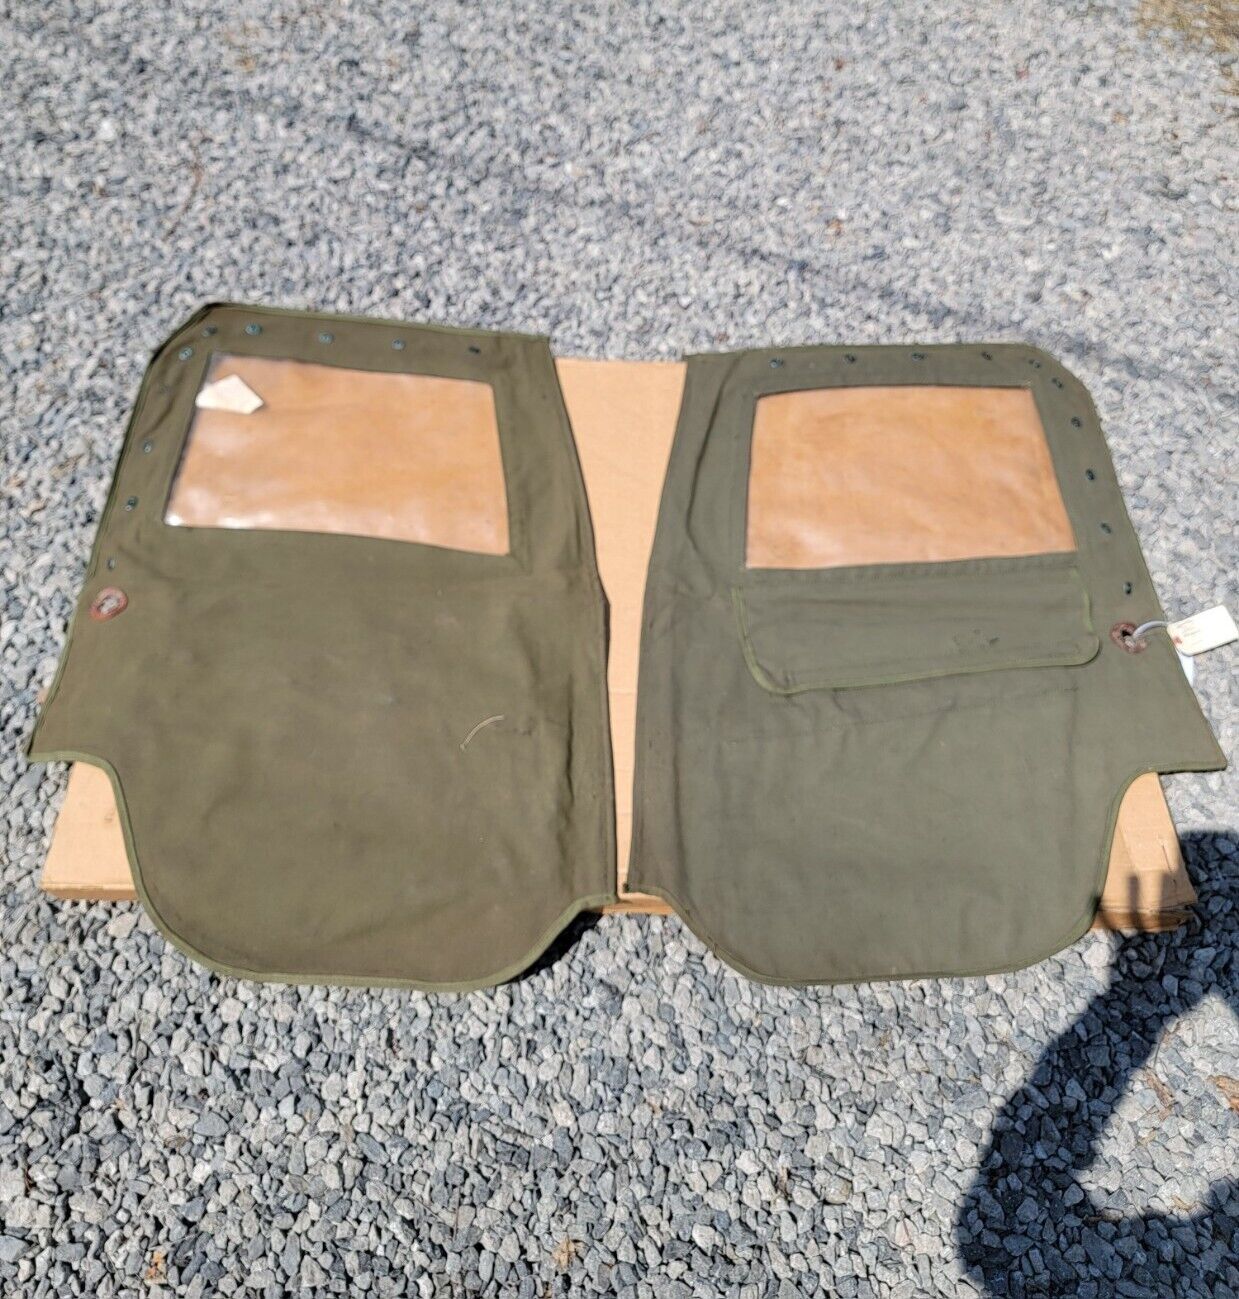 NOS Left & Right OD Canvas Doors (No Frames) for M38? or M38A1? Willys Jeep G740